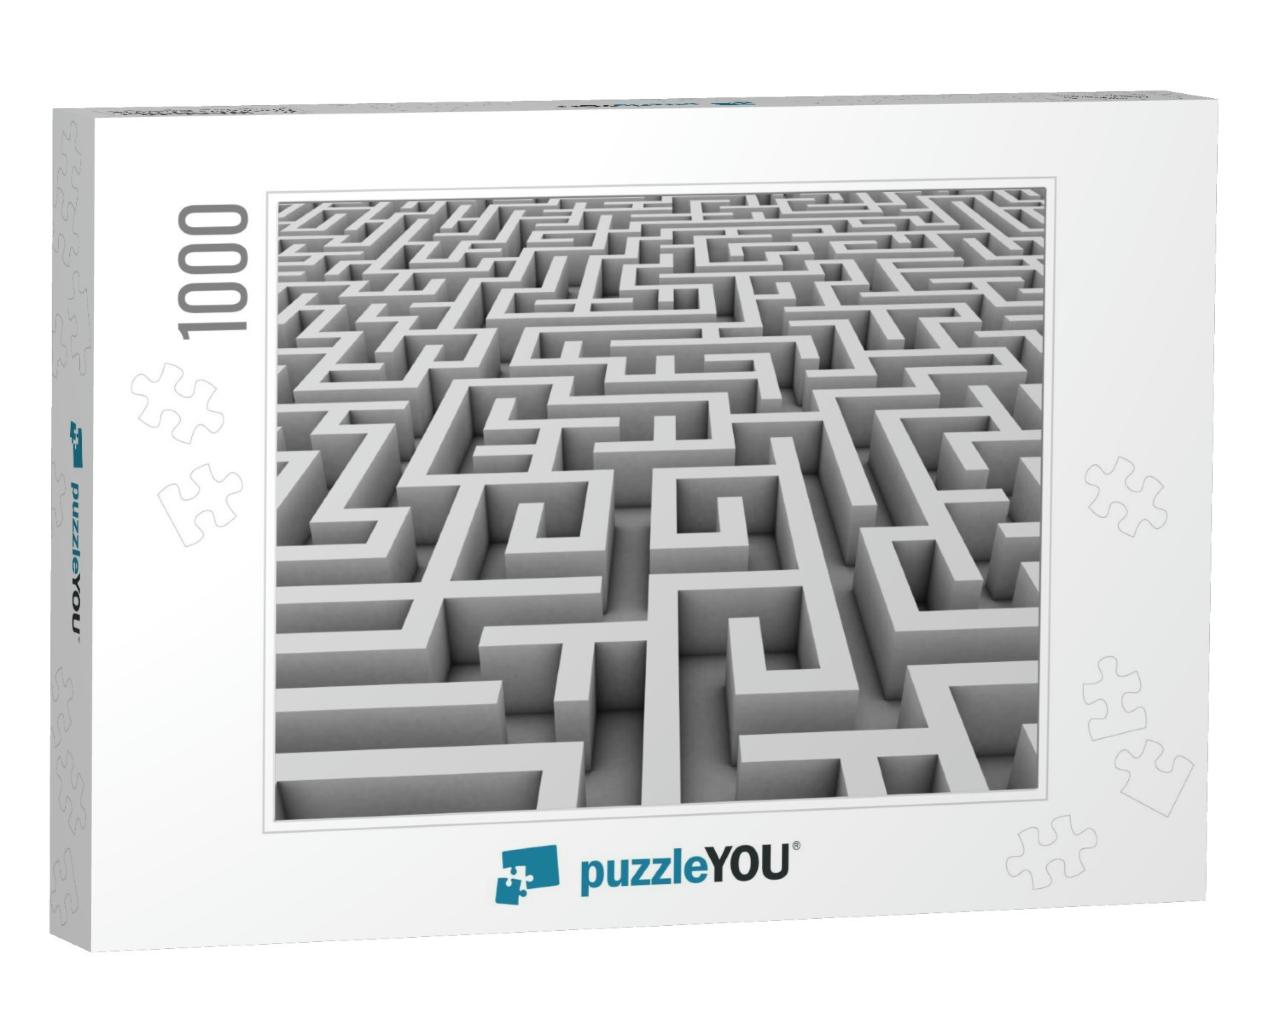 Endless Maze 3D Illustration... Jigsaw Puzzle with 1000 pieces